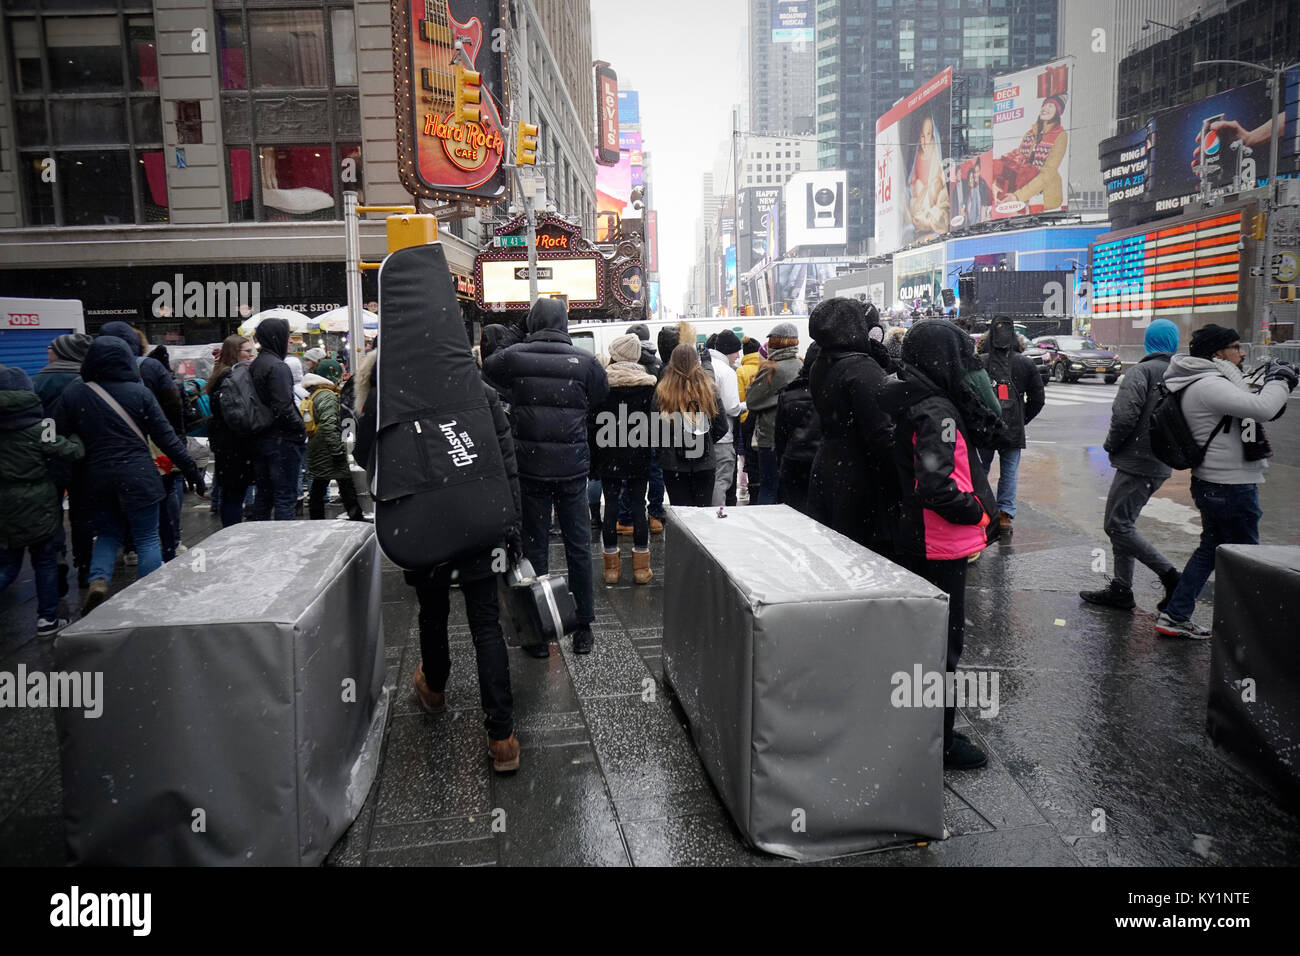 Tourists pass through barricades at the perimeter of Times Square in New York on Saturday, December 30, 2017. Security preparations are in place for New Year's eve in Times Square including the placement of rooftop observations teams and NYPD snipers. The weather for New Year's Eve is expected to be in the low teens as many stand outside for hours waiting for the Times Square Ball to drop.(© Richard B. Levine) Stock Photo